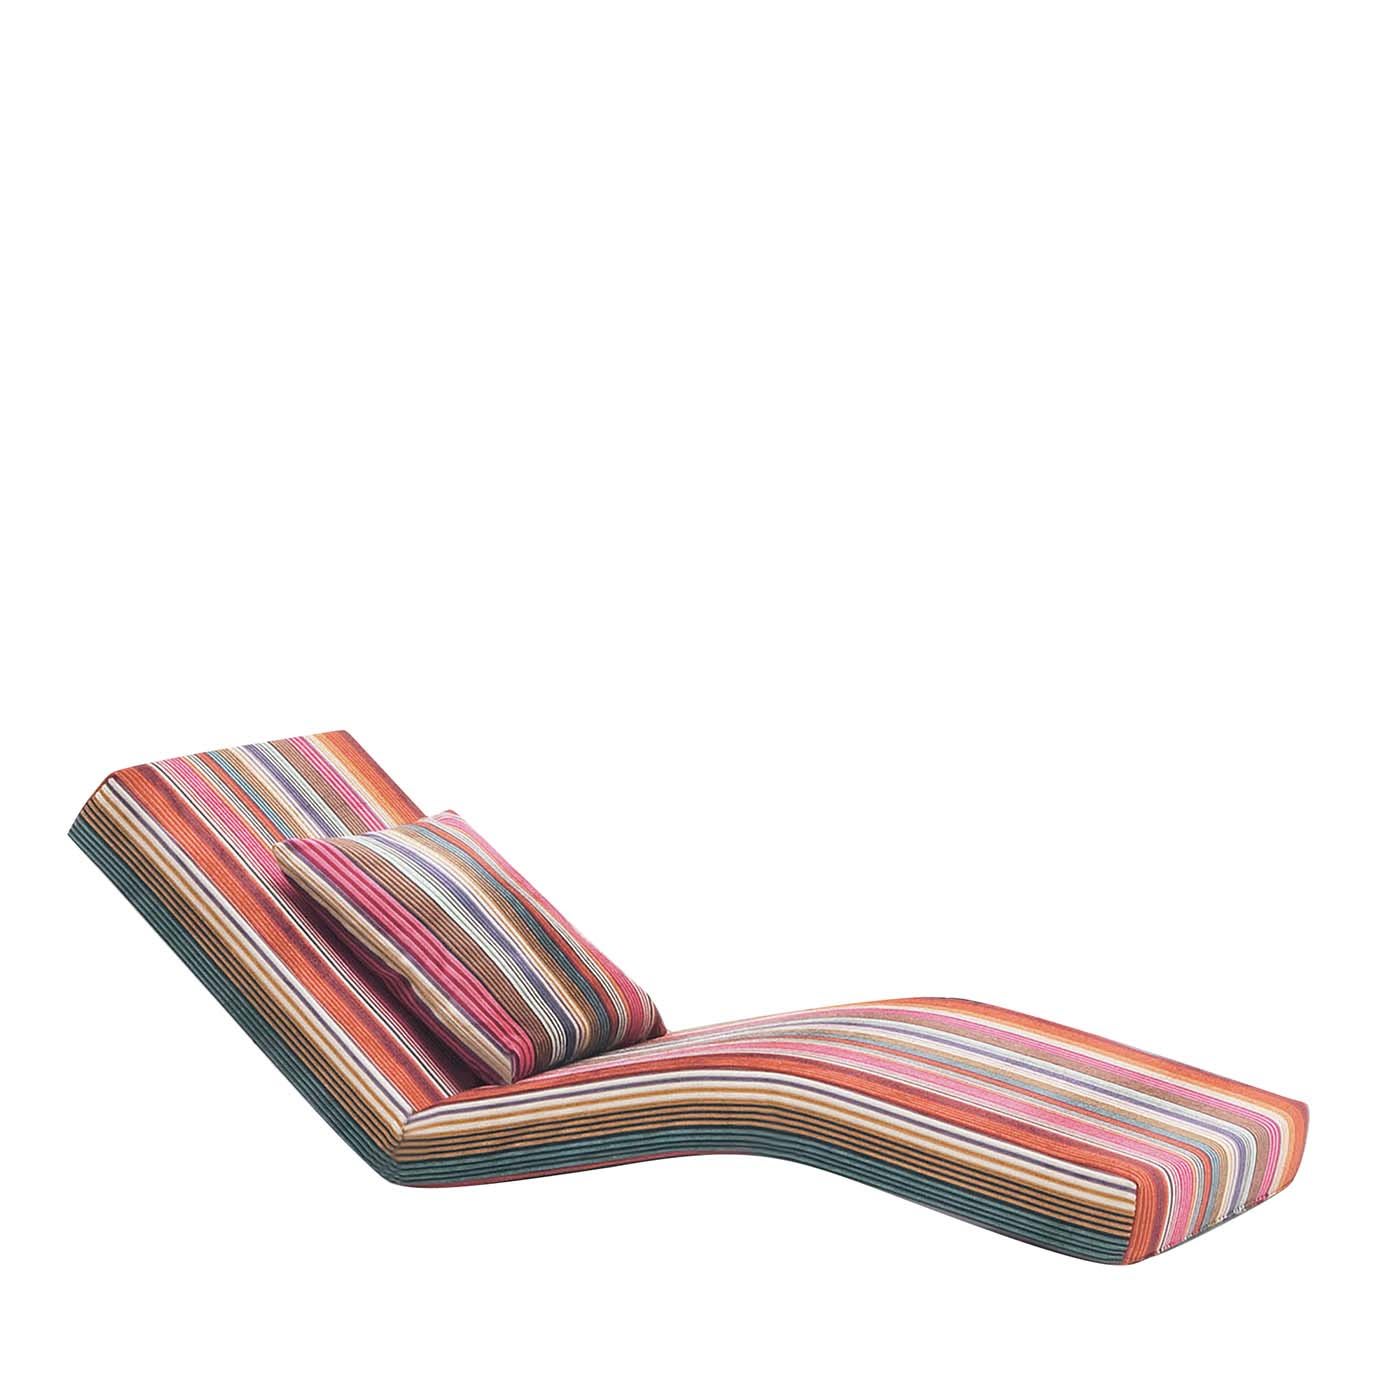 LIBERTAD JALAMAR INDOOR CHAISE LONGUE - Missoni Home Collection